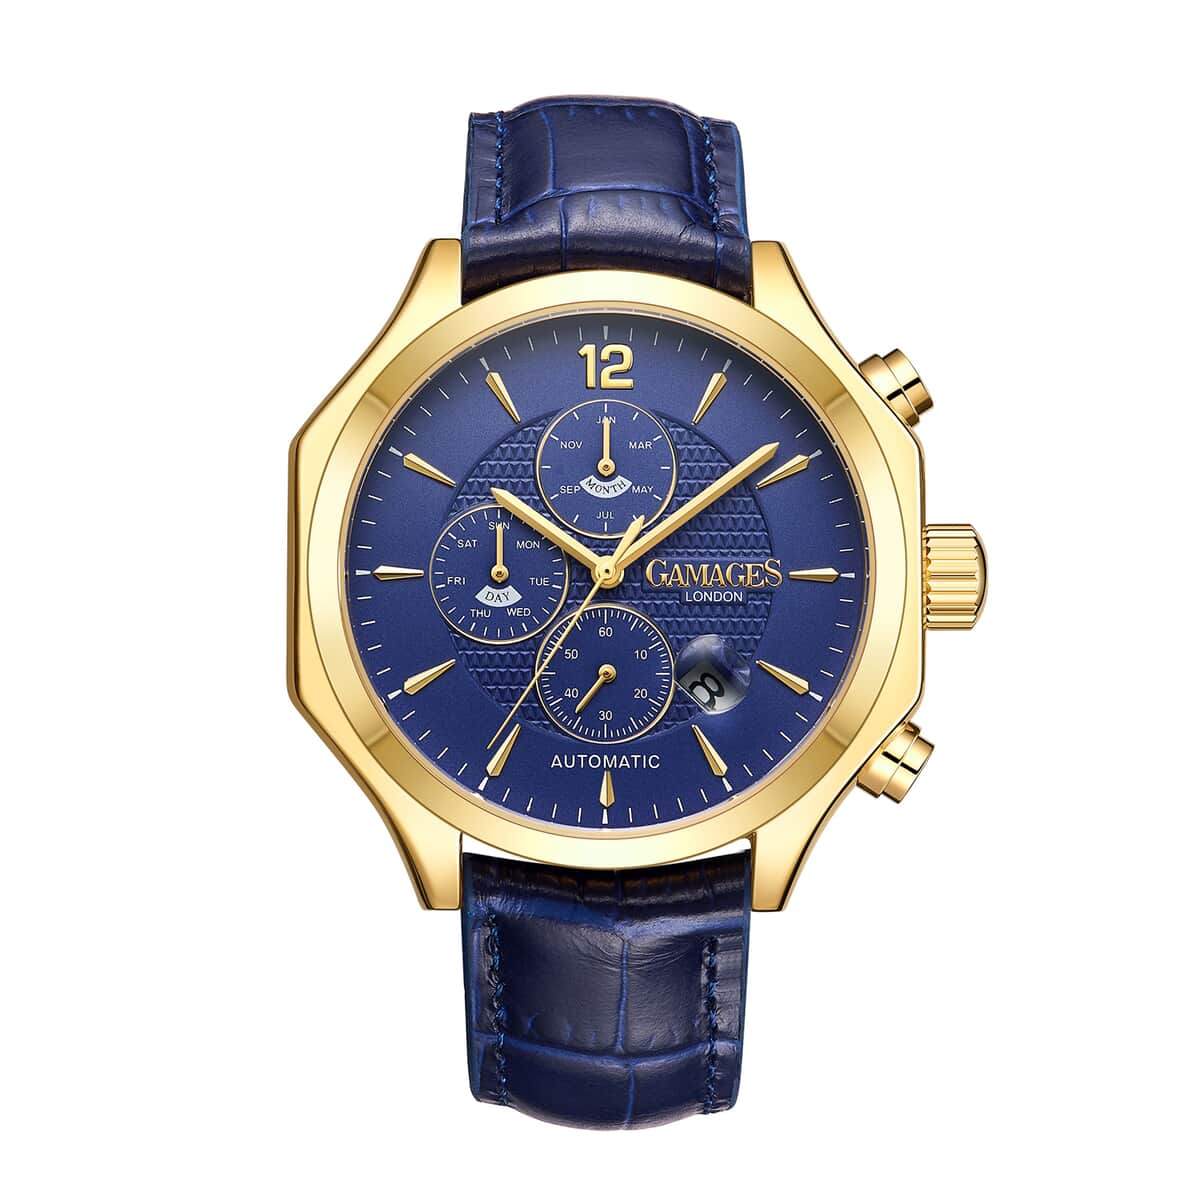 GAMAGES OF LONDON Limited Edition Hand Assembled Grandeur Automatic Movement Genuine Leather Strap Watch in Blue (45mm) FREE GIFT PEN image number 0